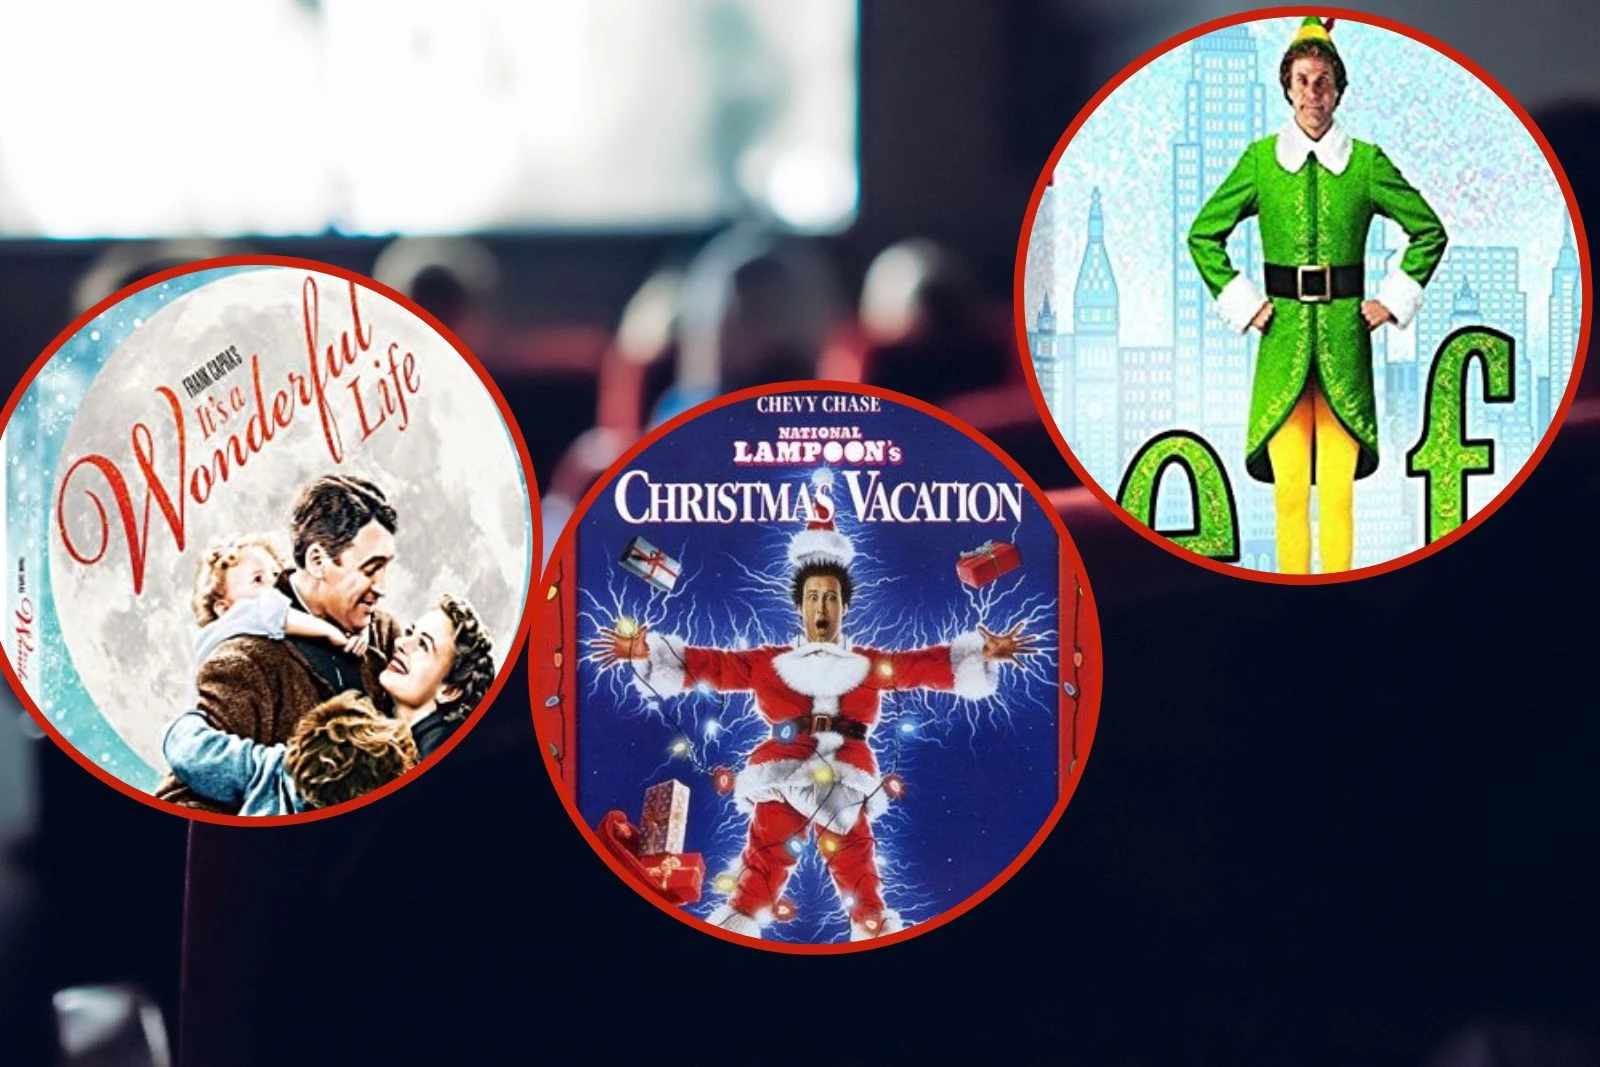 Forget Streaming, See Christmas Movies on the Big Screen